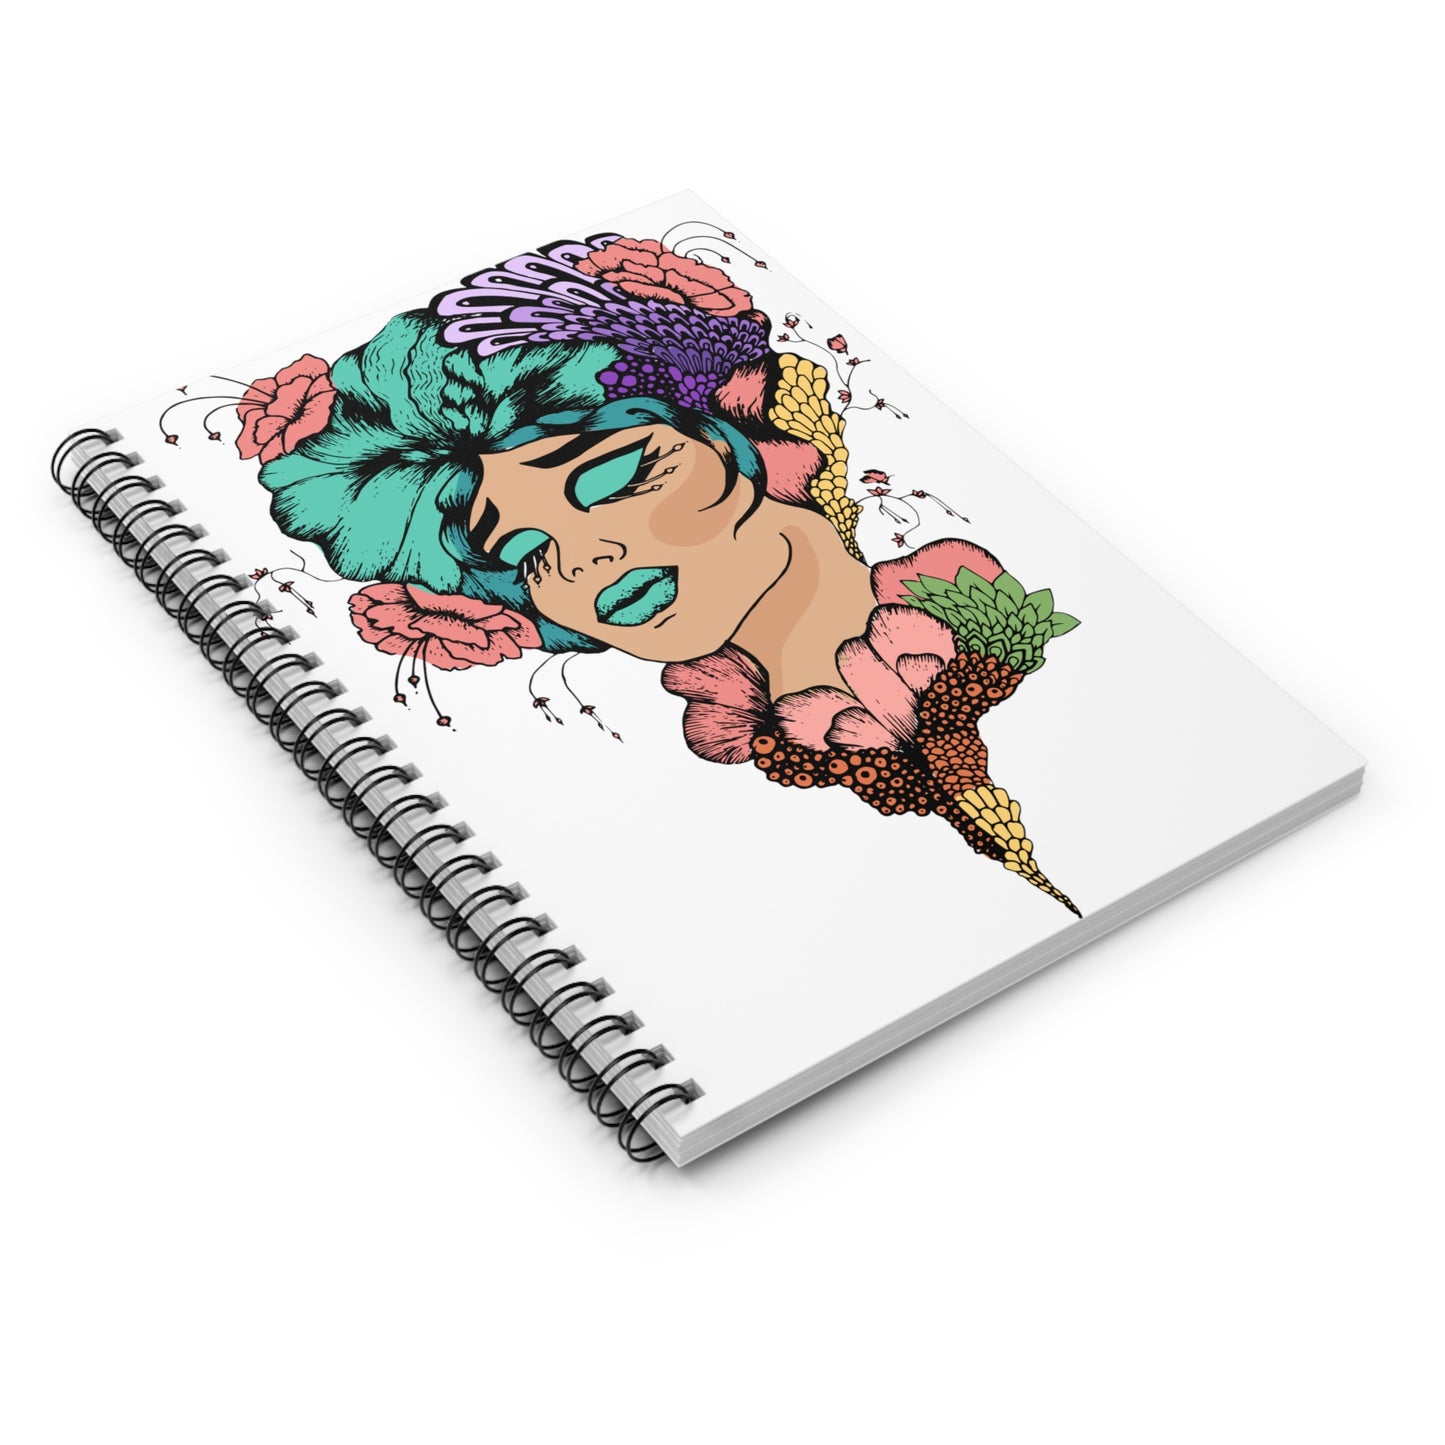 Floral Woman Spiral Notebook - Ruled Line